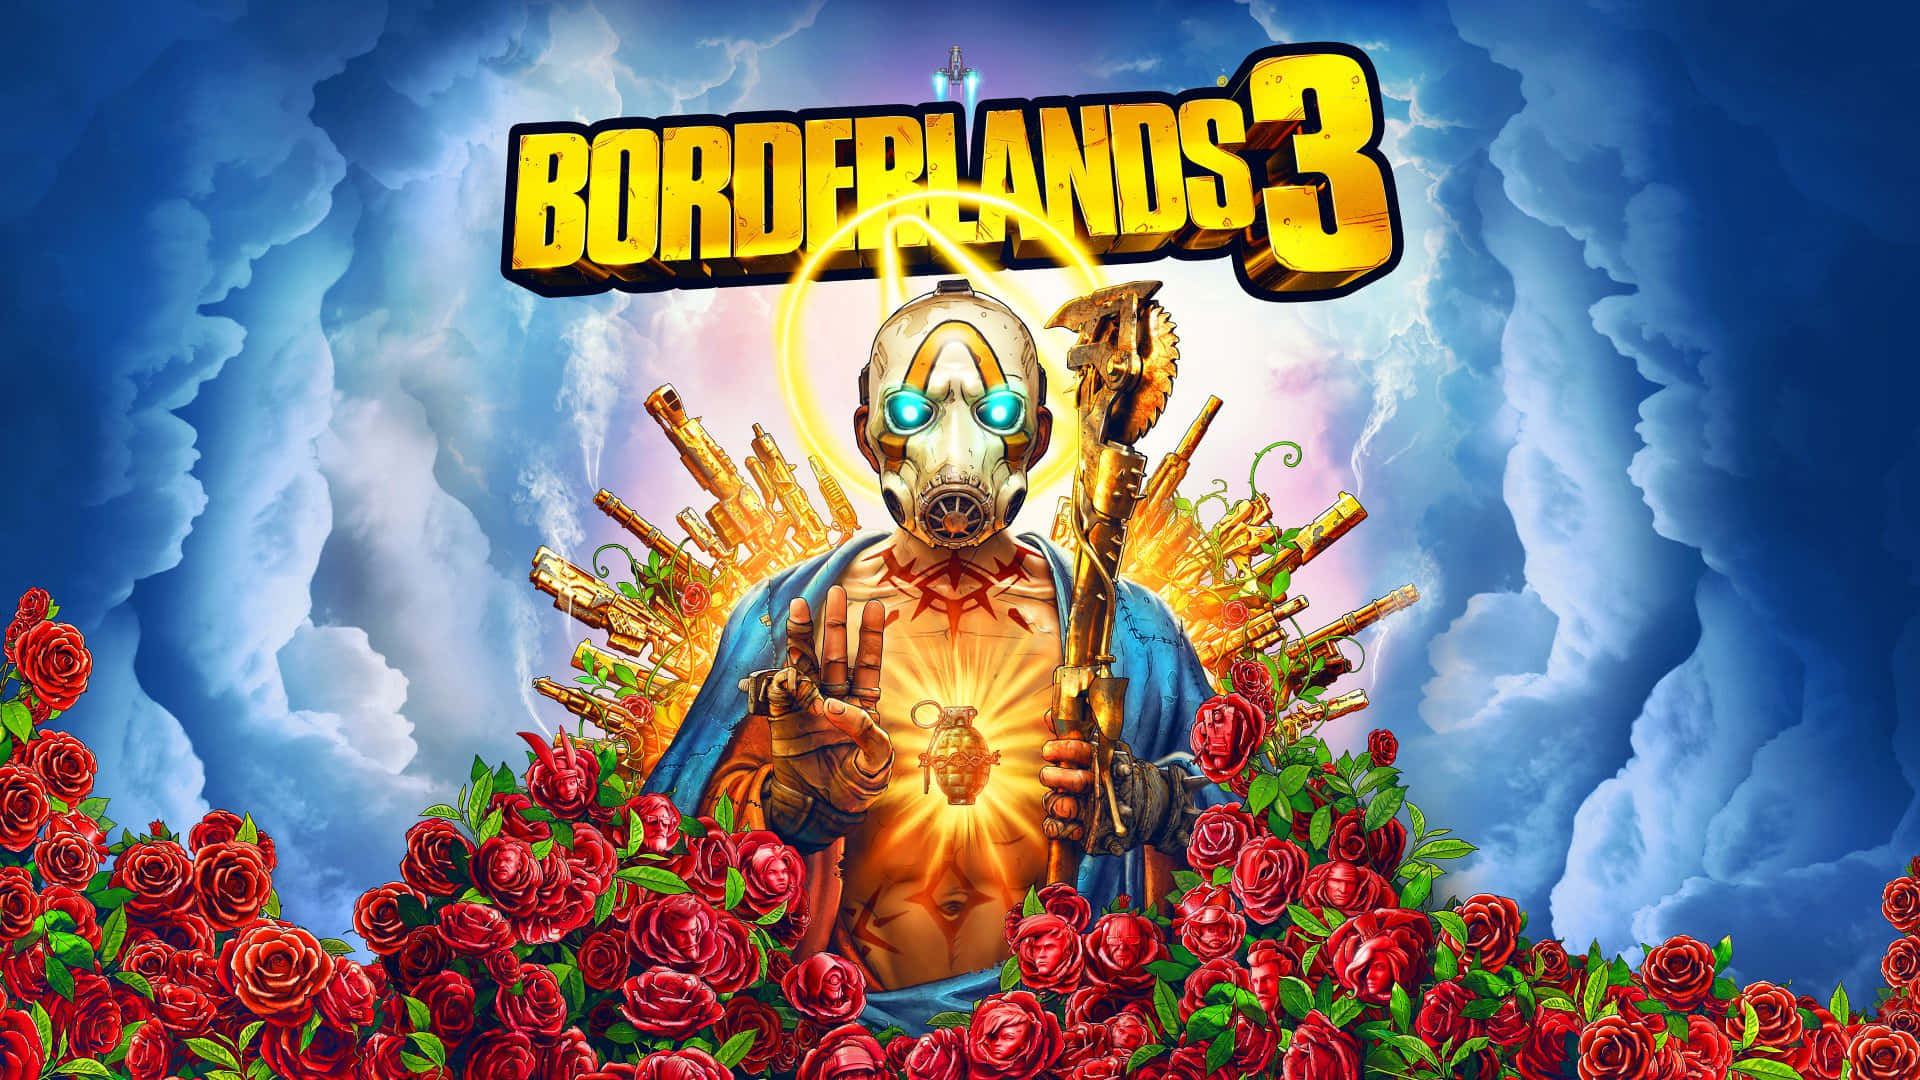 Out of this world gaming experience with Borderlands 3